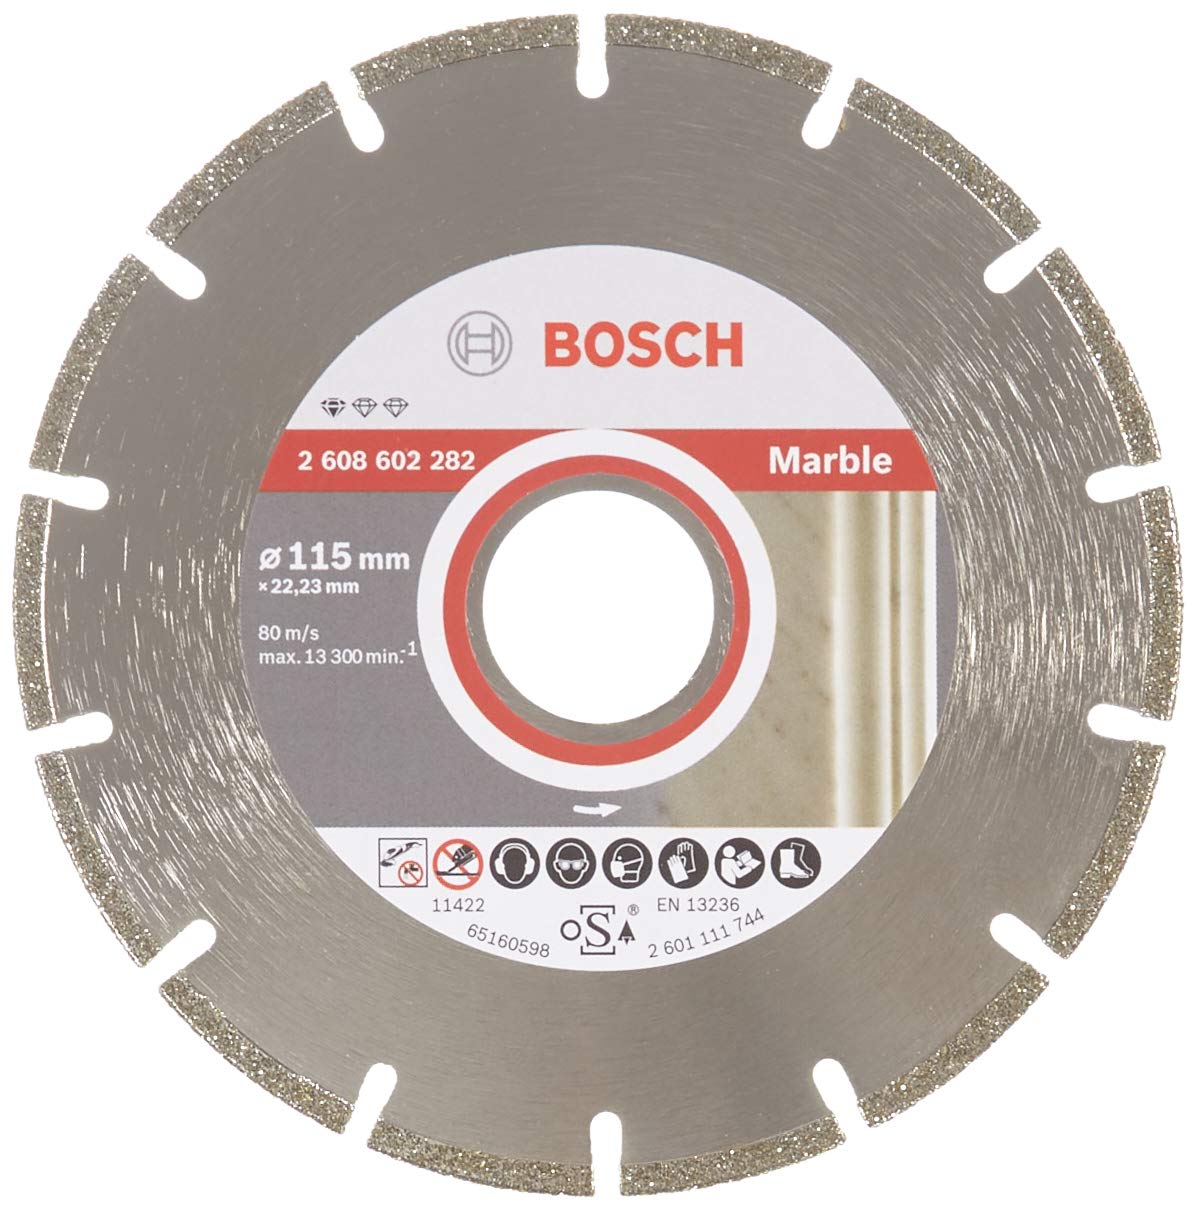 Bosch Standard for Marble 115 x 22,23 x 2,2 x 3 segmented 2608602282 Power Tool Services